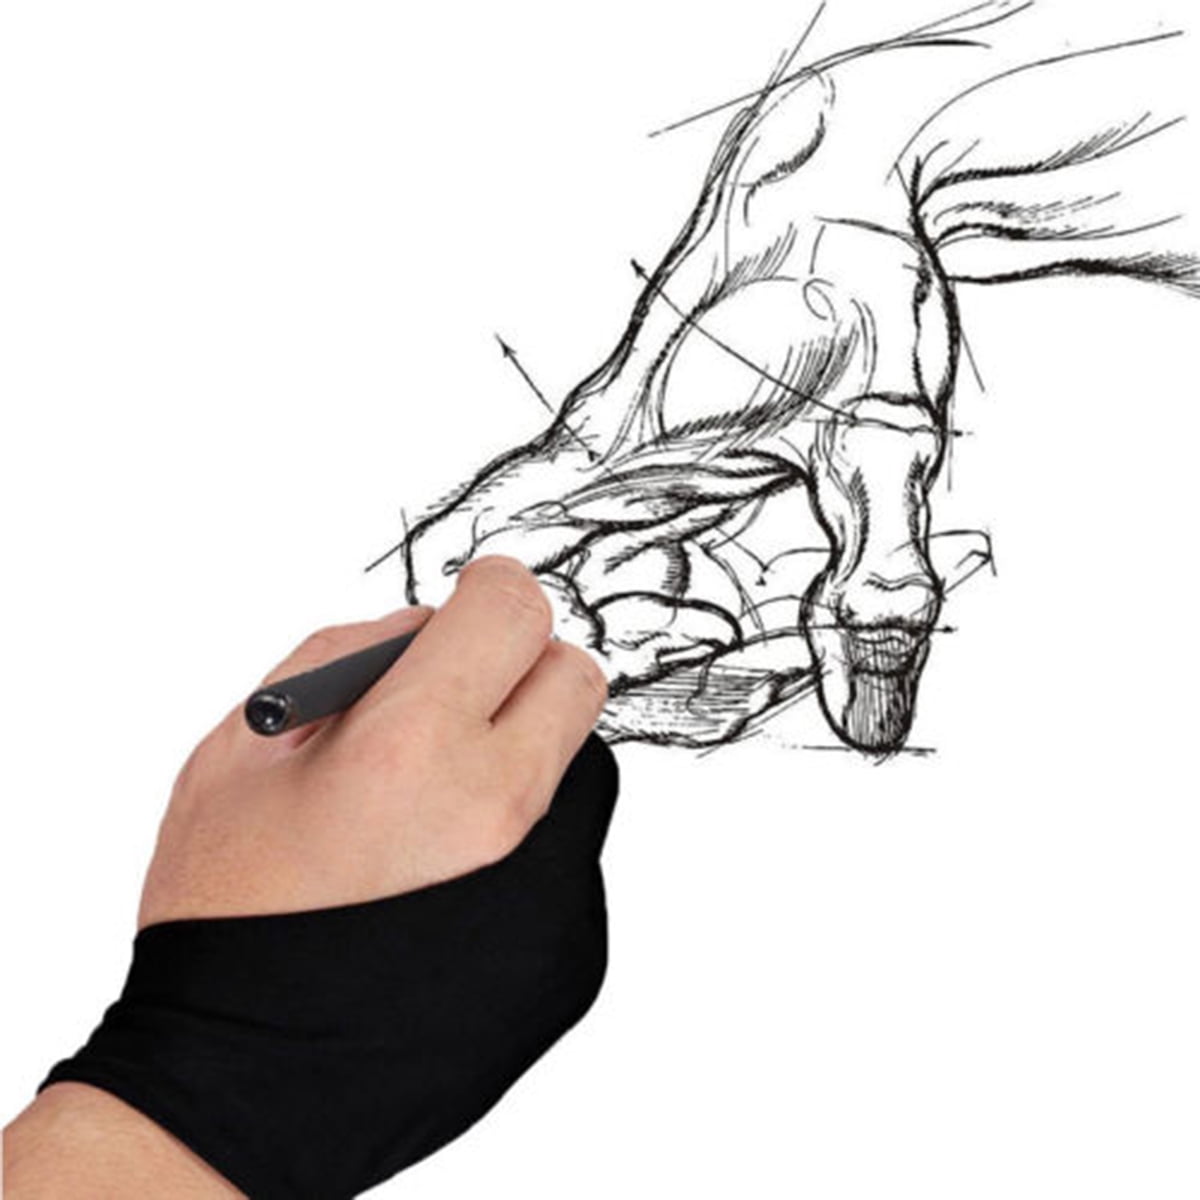 Anti Fouling 2 Fein Drawing Thumb Gloves For Fashion Artist Graphics Ideal  For Both Left And Right Hand Black From Bailu11, $13.6